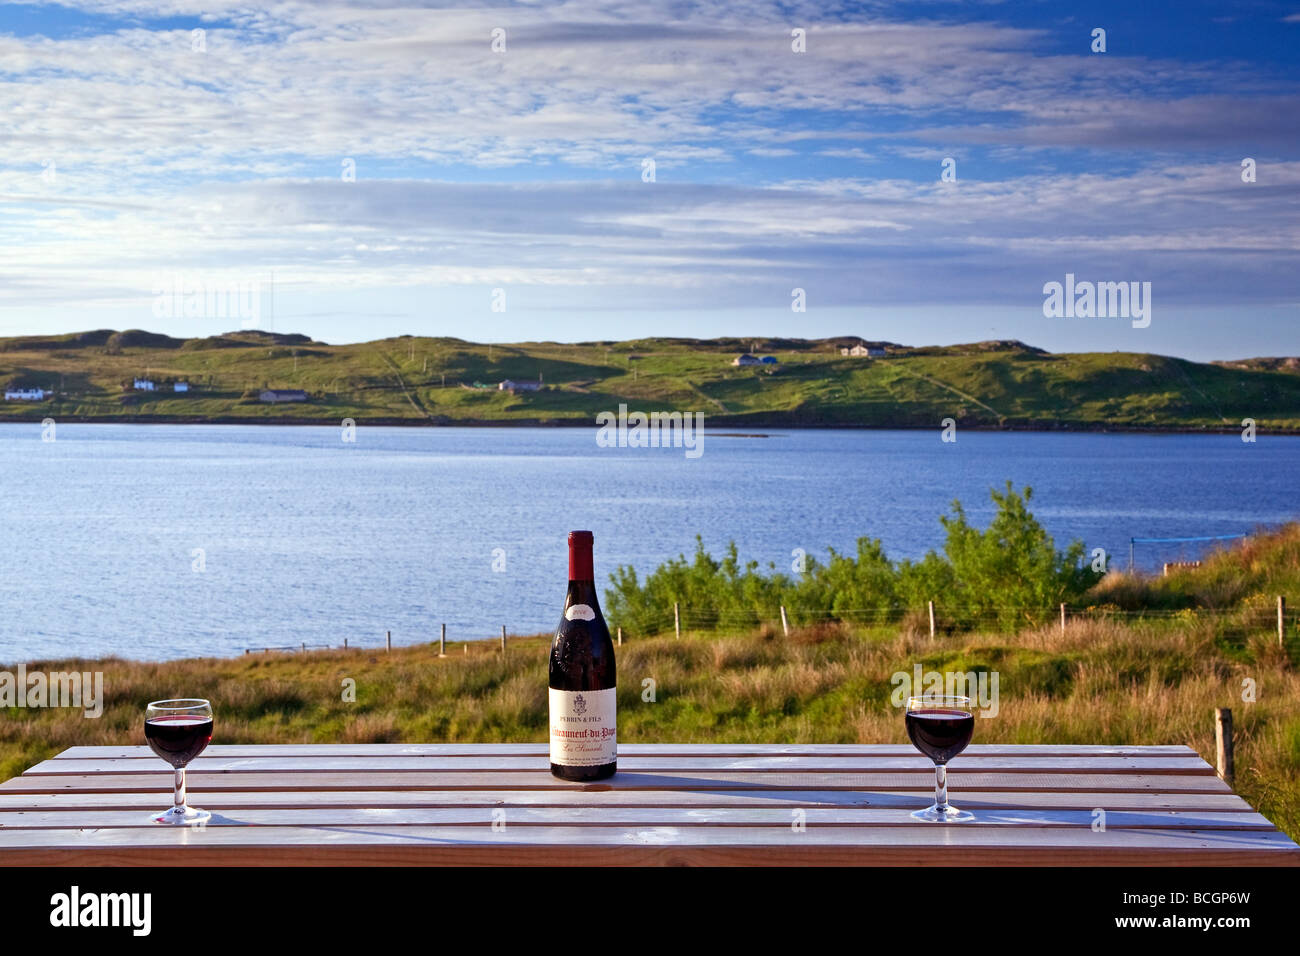 Wine bottle and glasses on a garden table overlooking Loch Roag, Isle of Lewis, Outer Hebrides, western isles, Scotland, UK 2009 Stock Photo